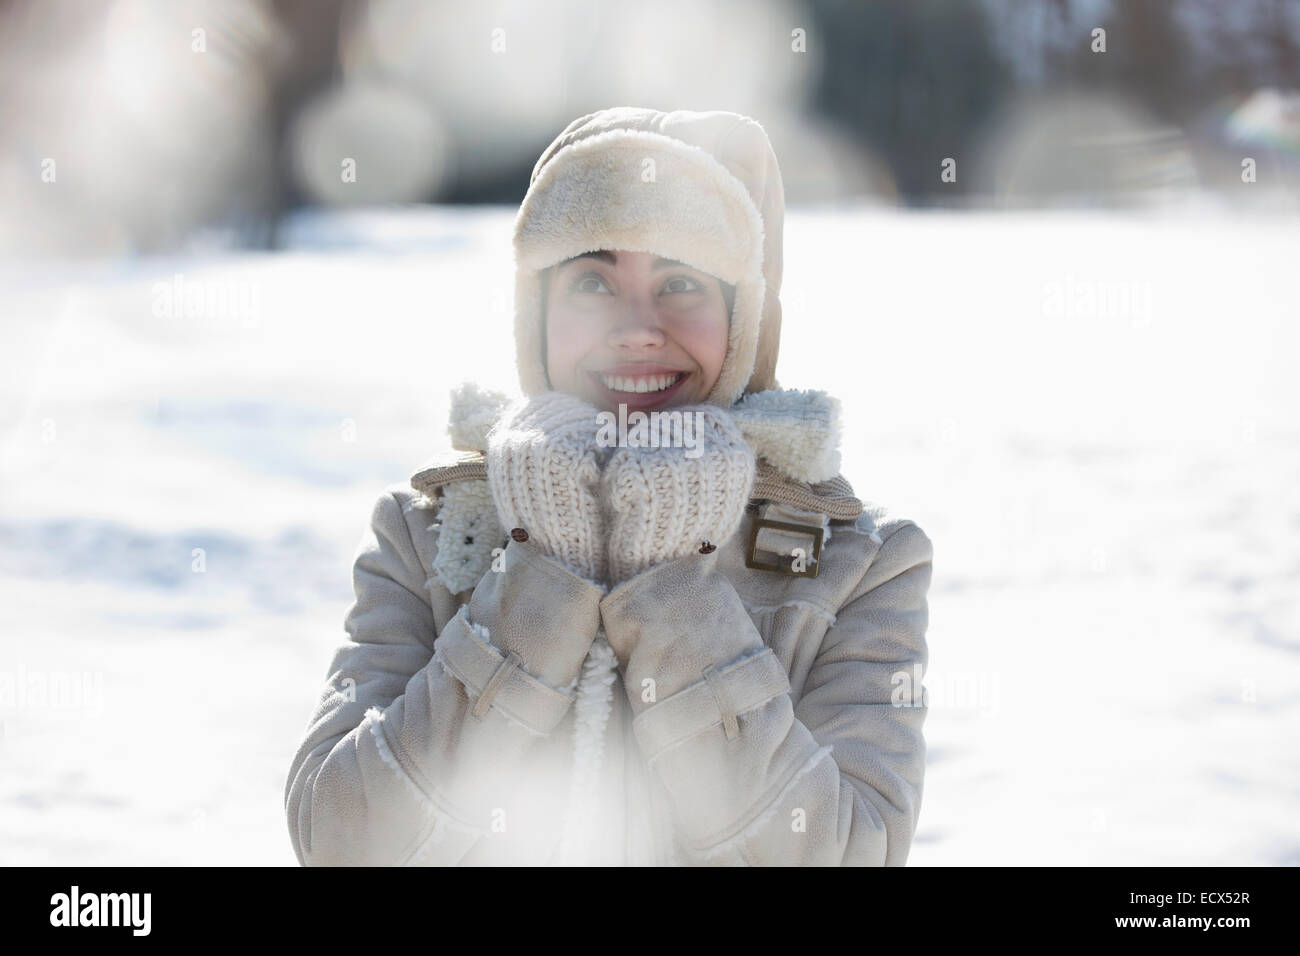 Woman in warm clothing smiling in snow Stock Photo